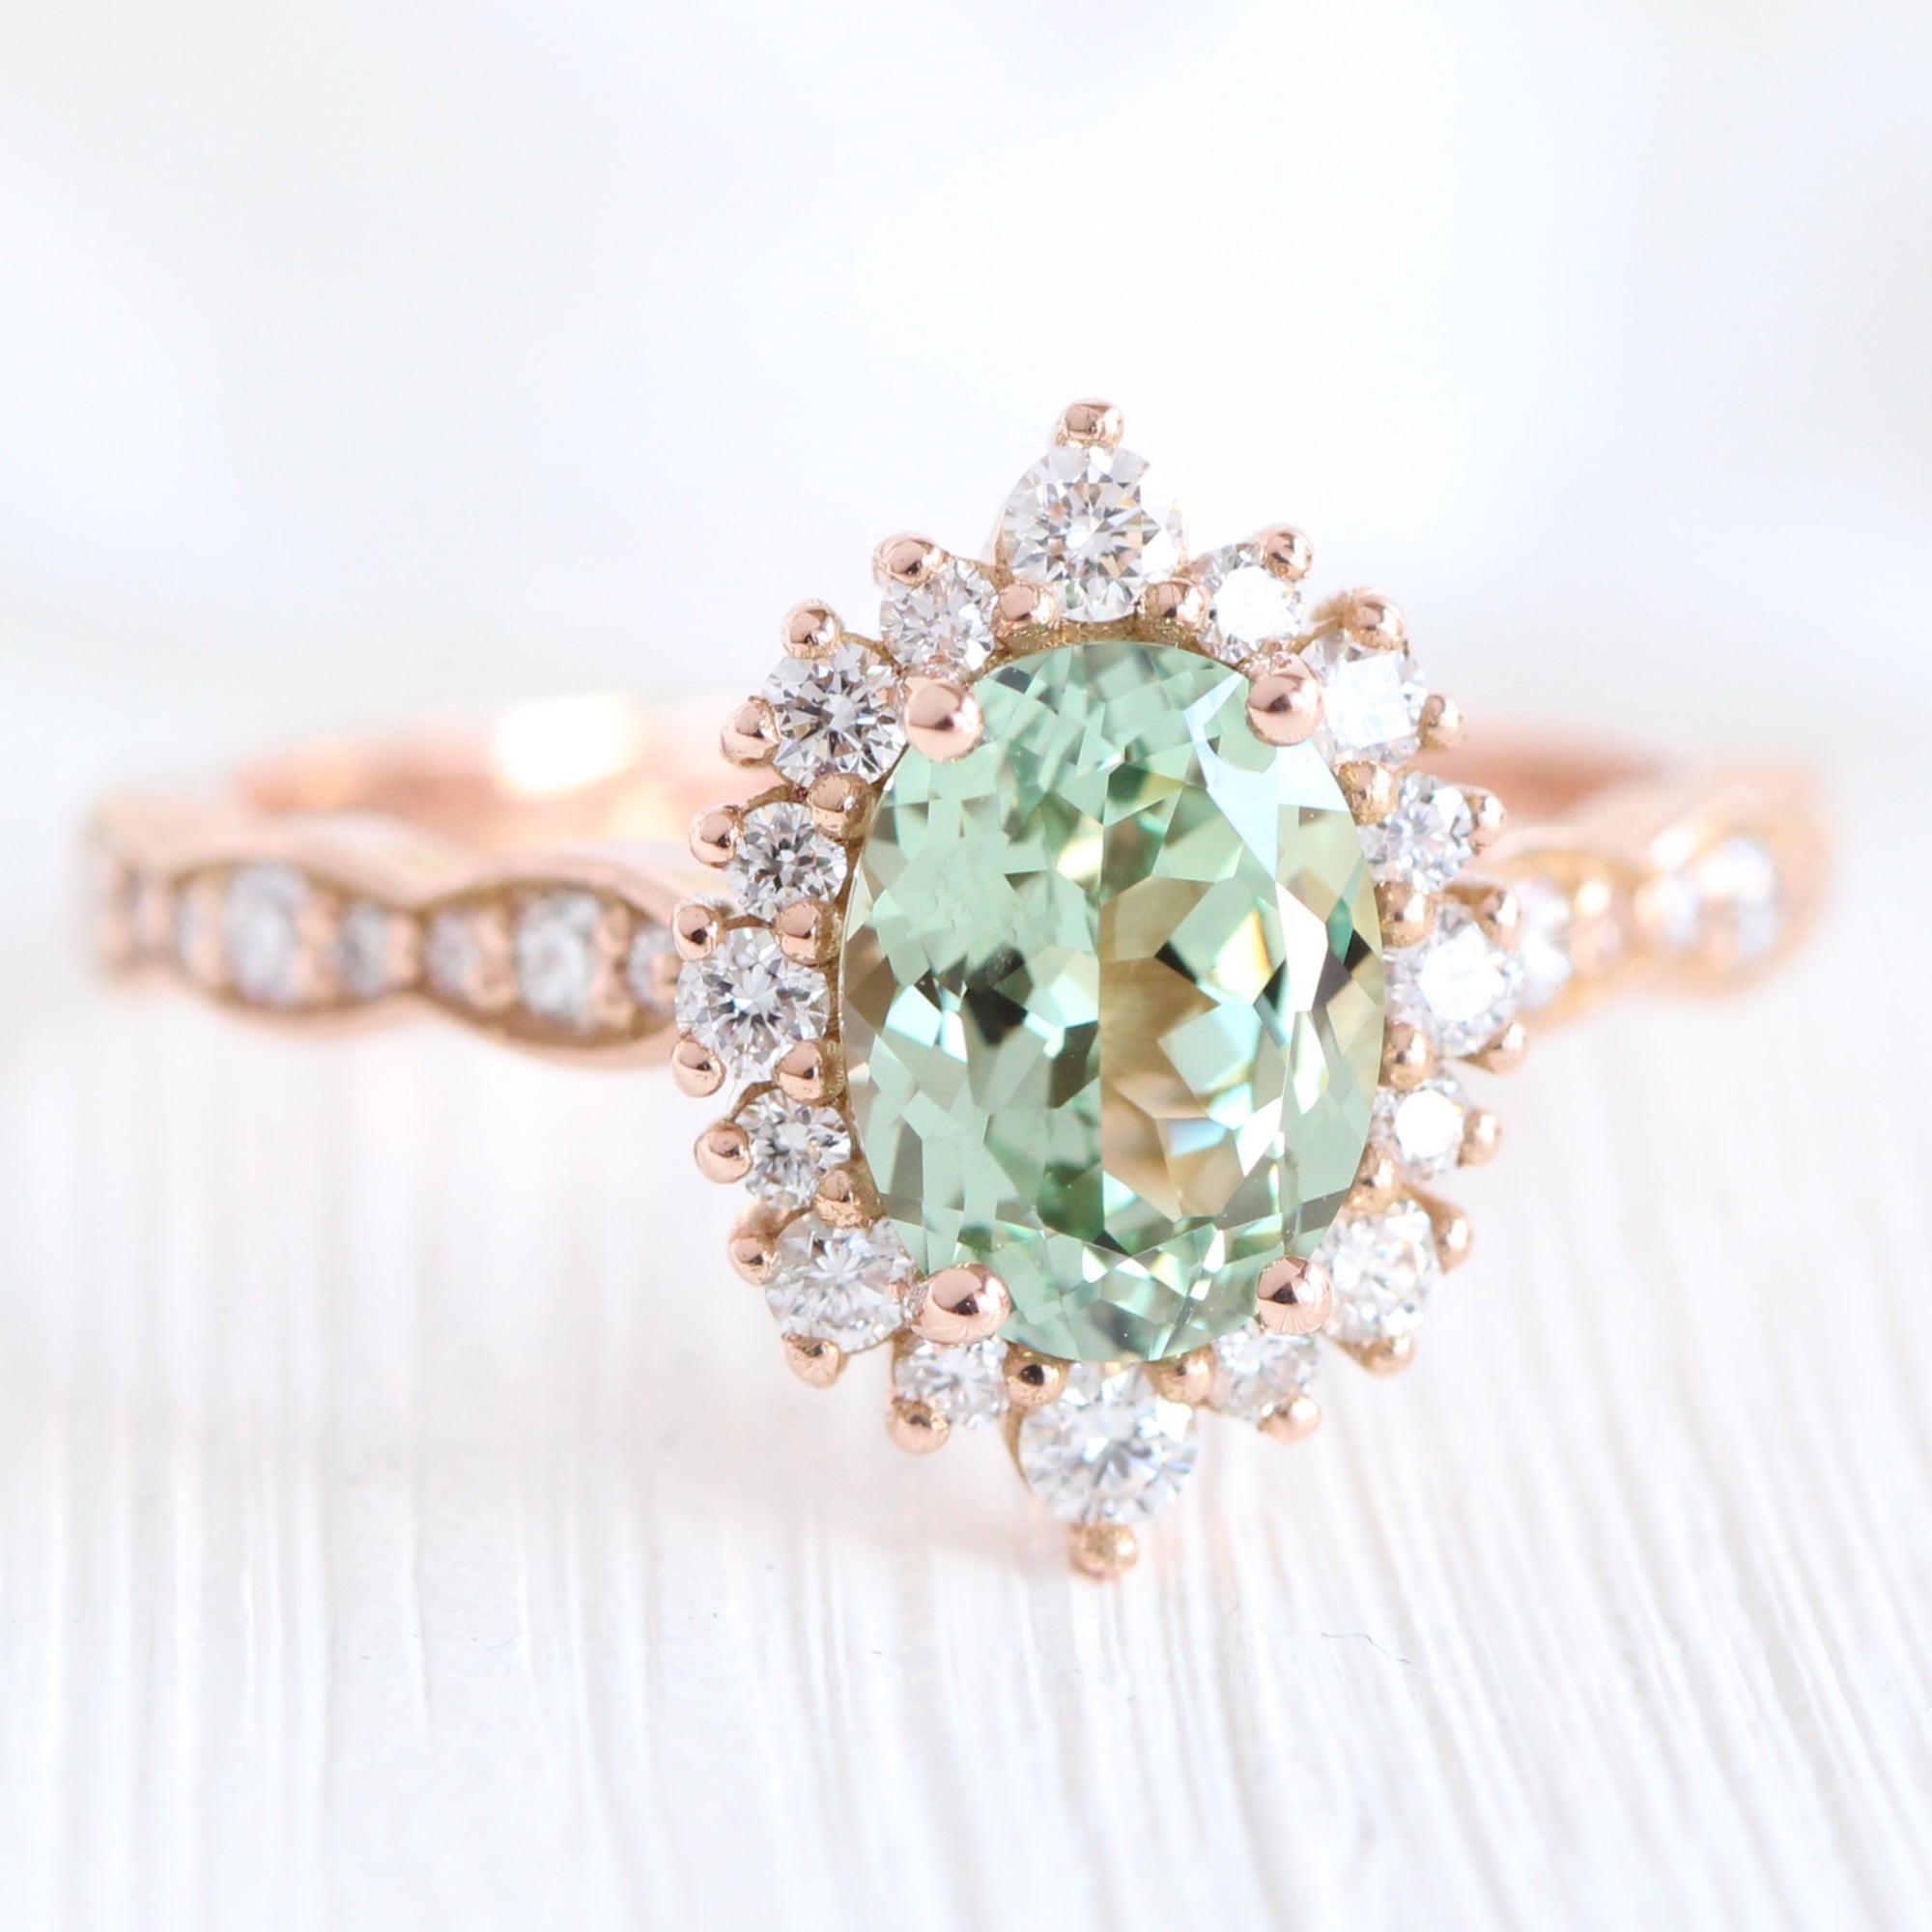 Oval green sapphire engagement ring rose gold halo diamond ring la more design jewelryOval green sapphire engagement ring rose gold halo diamond ring la more design jewelry